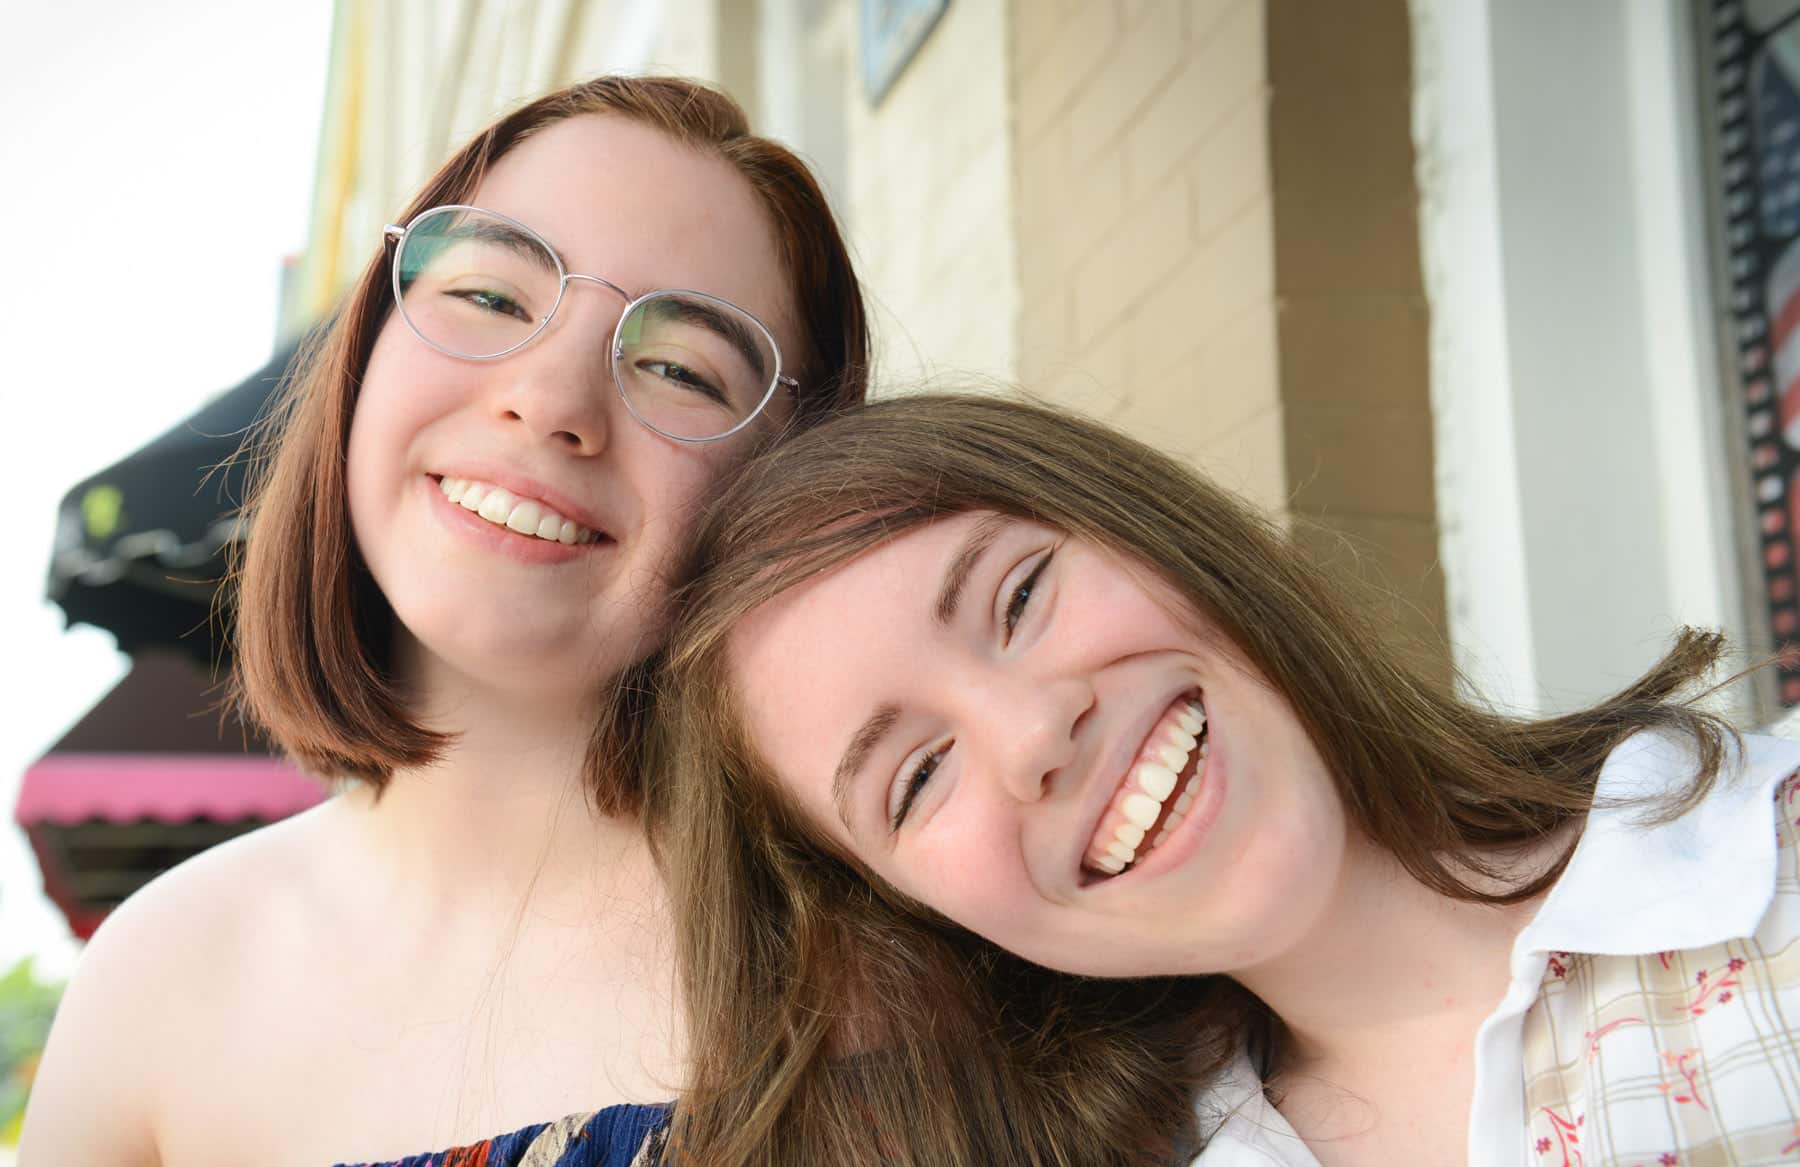 A girl smiling and leaning on her friend's shoulder.